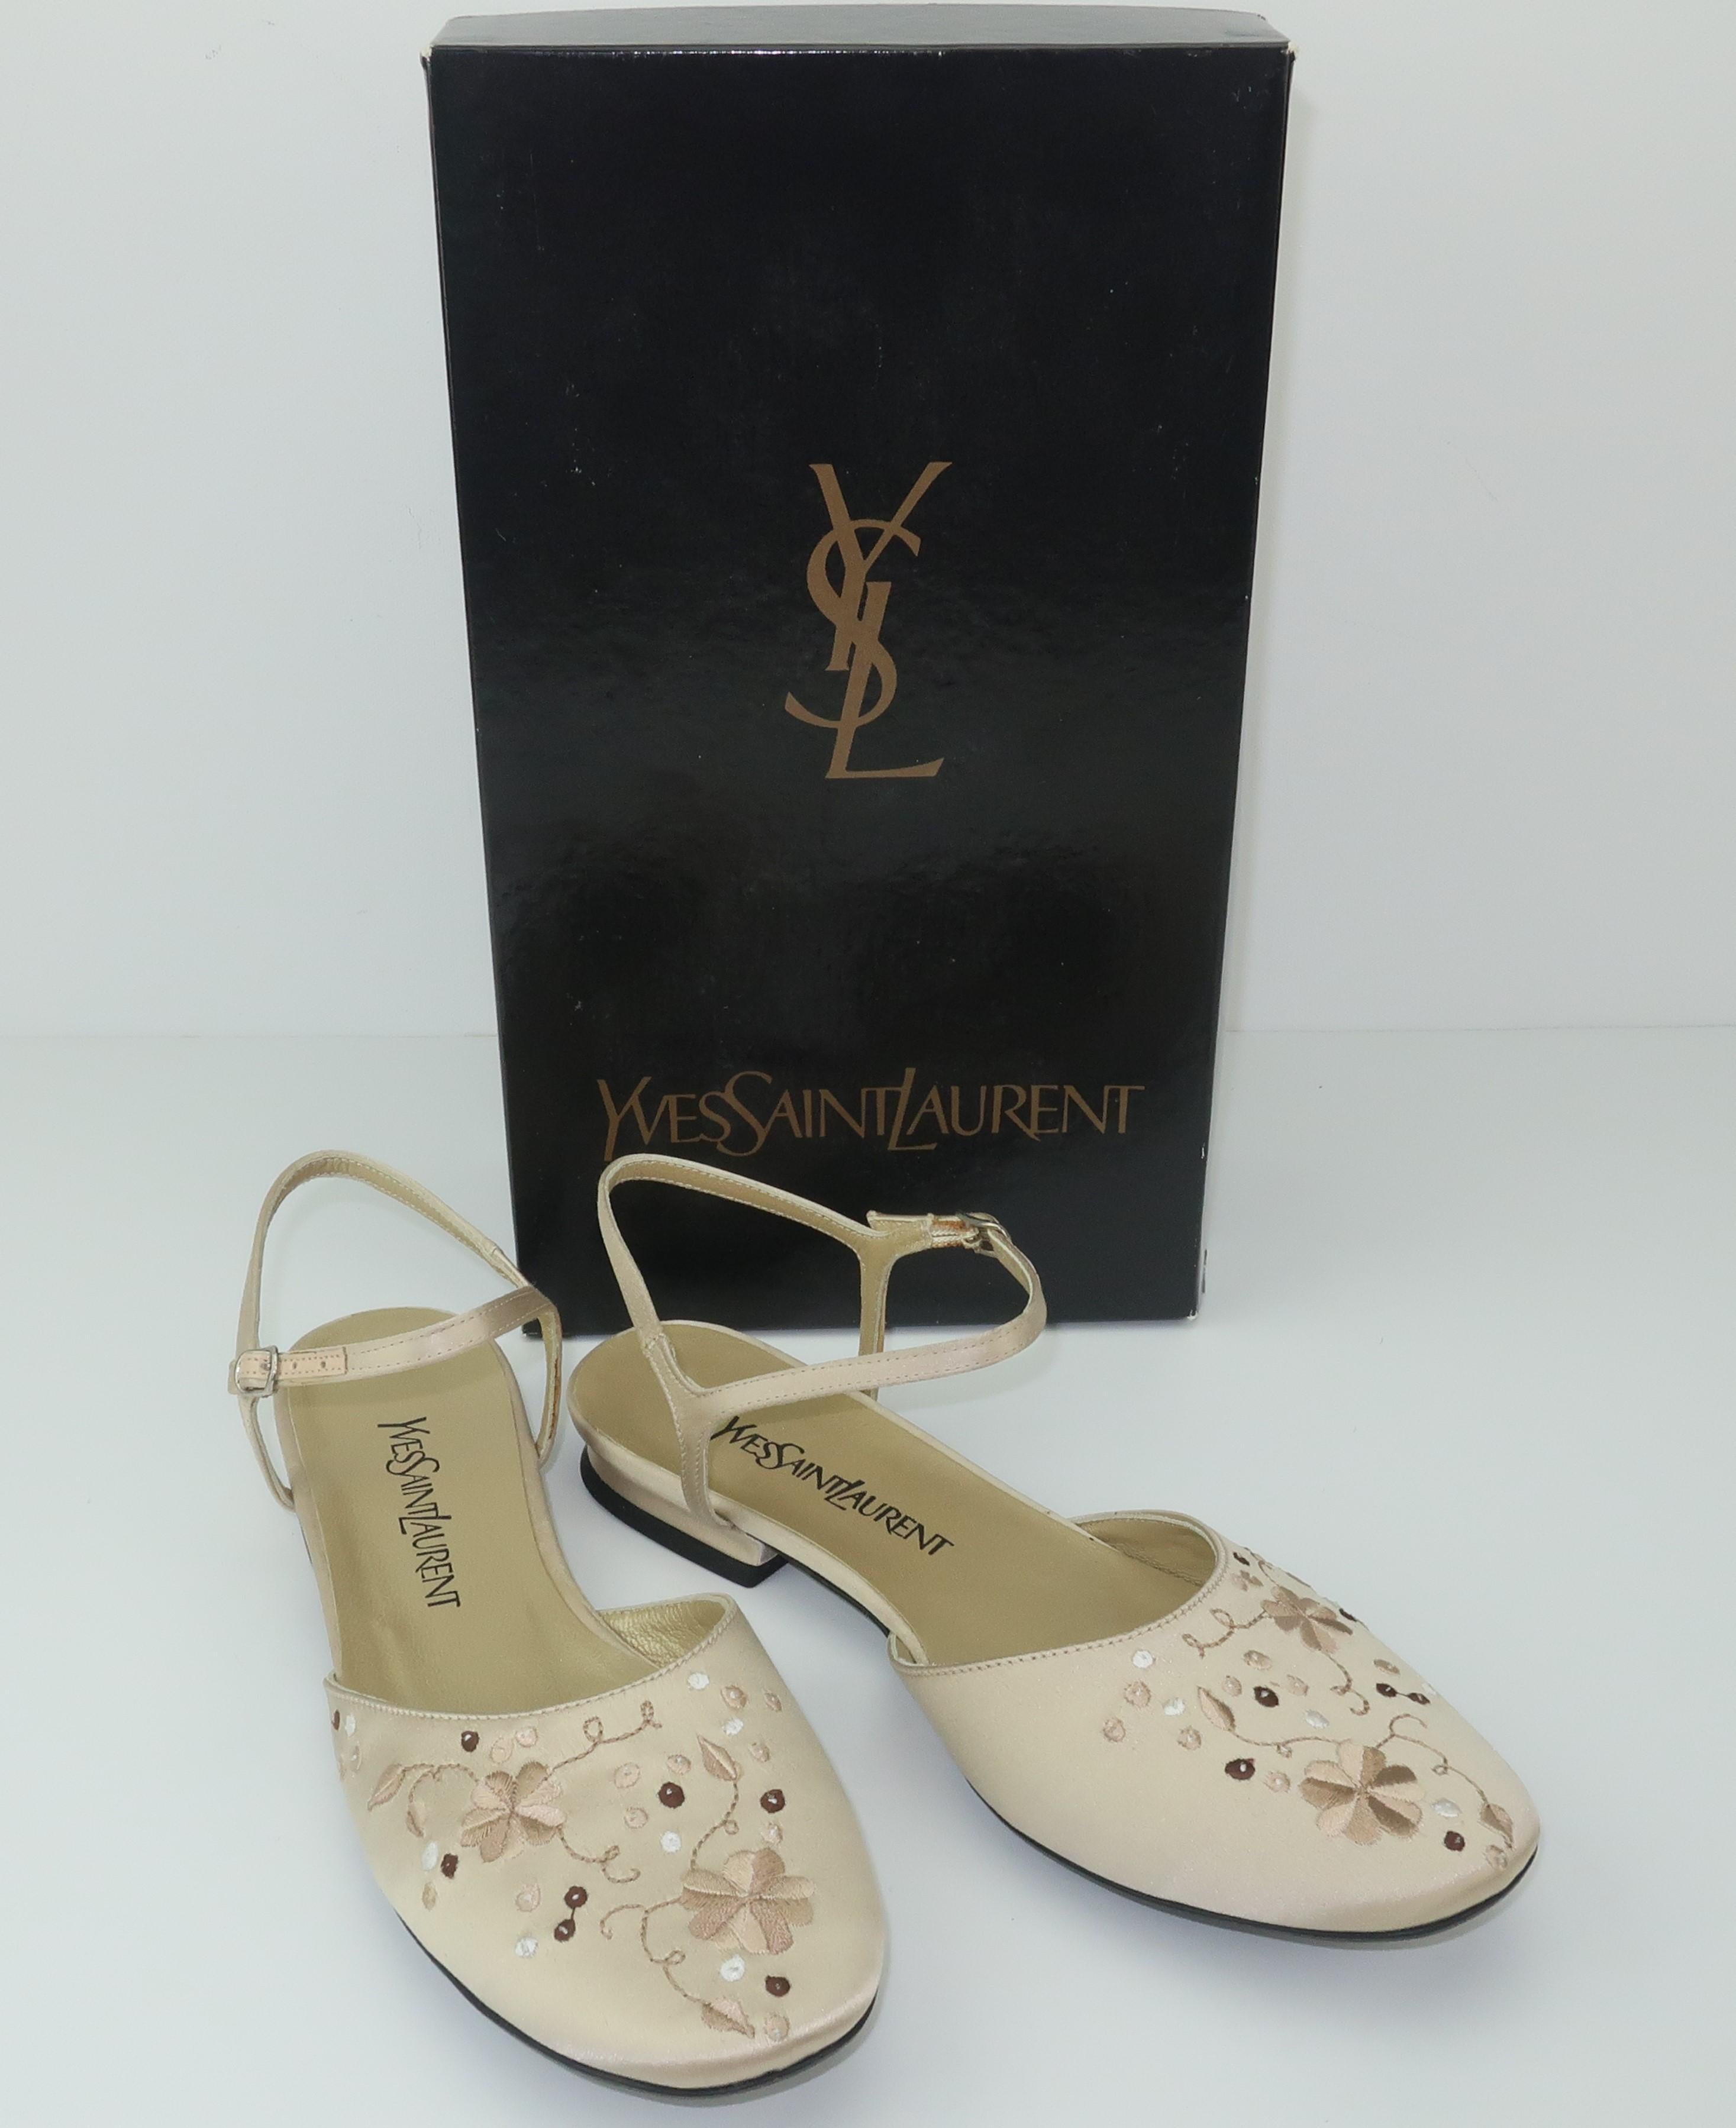 Yves Saint Laurent Ivory Satin Embroidered Shoes Sz 6 4